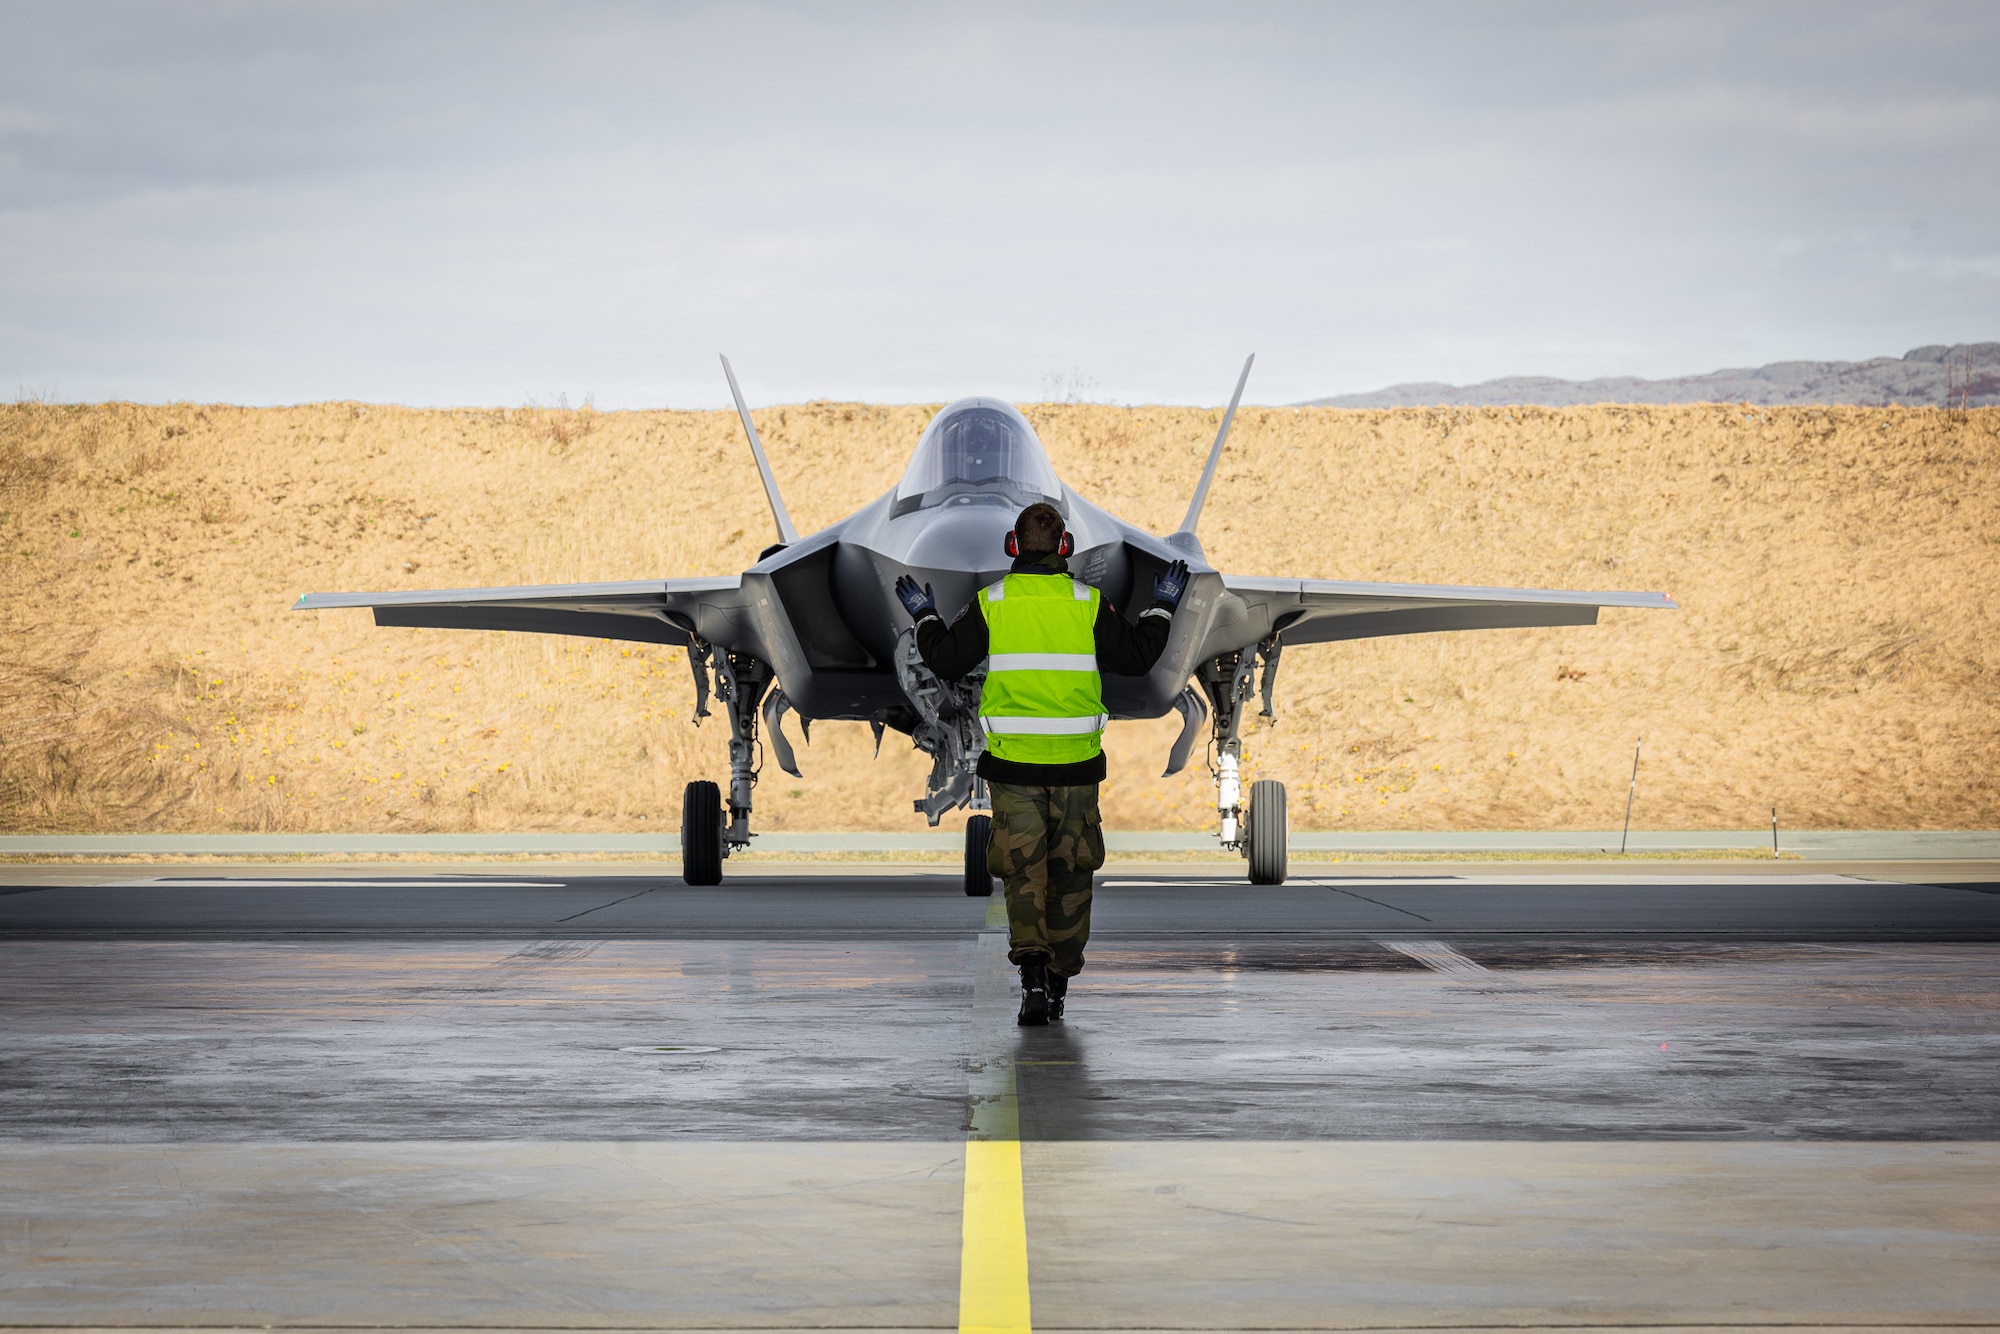 A Royal Norwegian Airman marshals in a U.S. F-35 Lightning II aircraft into a hangar at Ørland Air Station in Norway, April 8, 2024. The mission marked the first time that Airmen from one nation’s military provided servicing to another nation’s F-35 aircraft without supervision. The cross servicing of aircraft between NATO partners highlights the future interoperability with fellow F-35 users across the European Theater. (RNoAF photo by Ole Andreas Vekve)